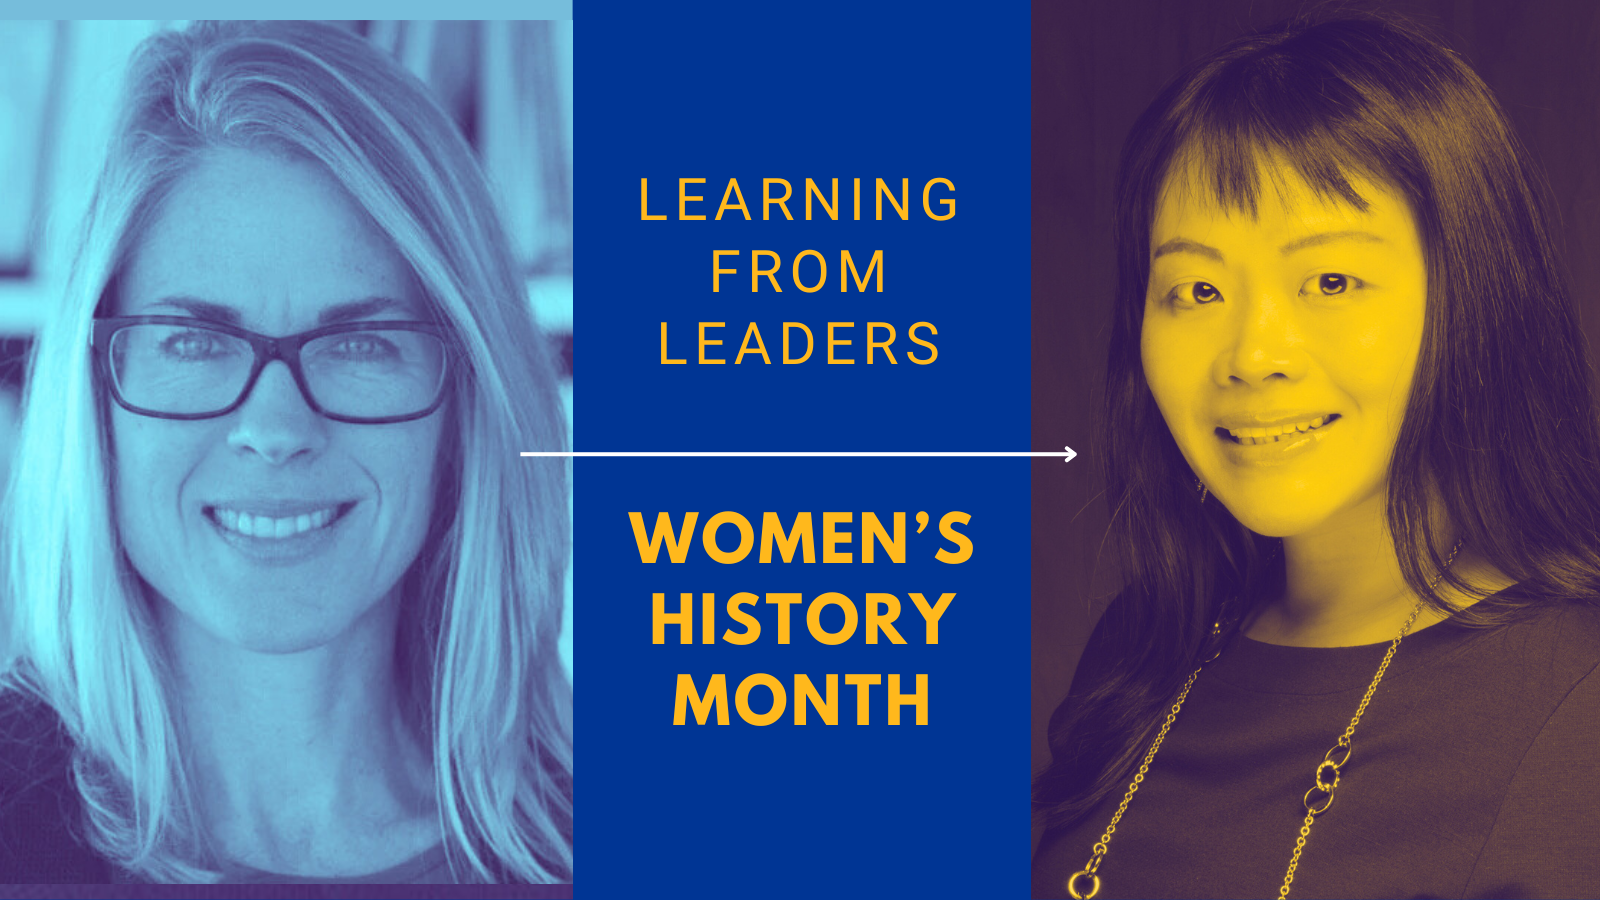 Header with two women that says: Learning from leaders